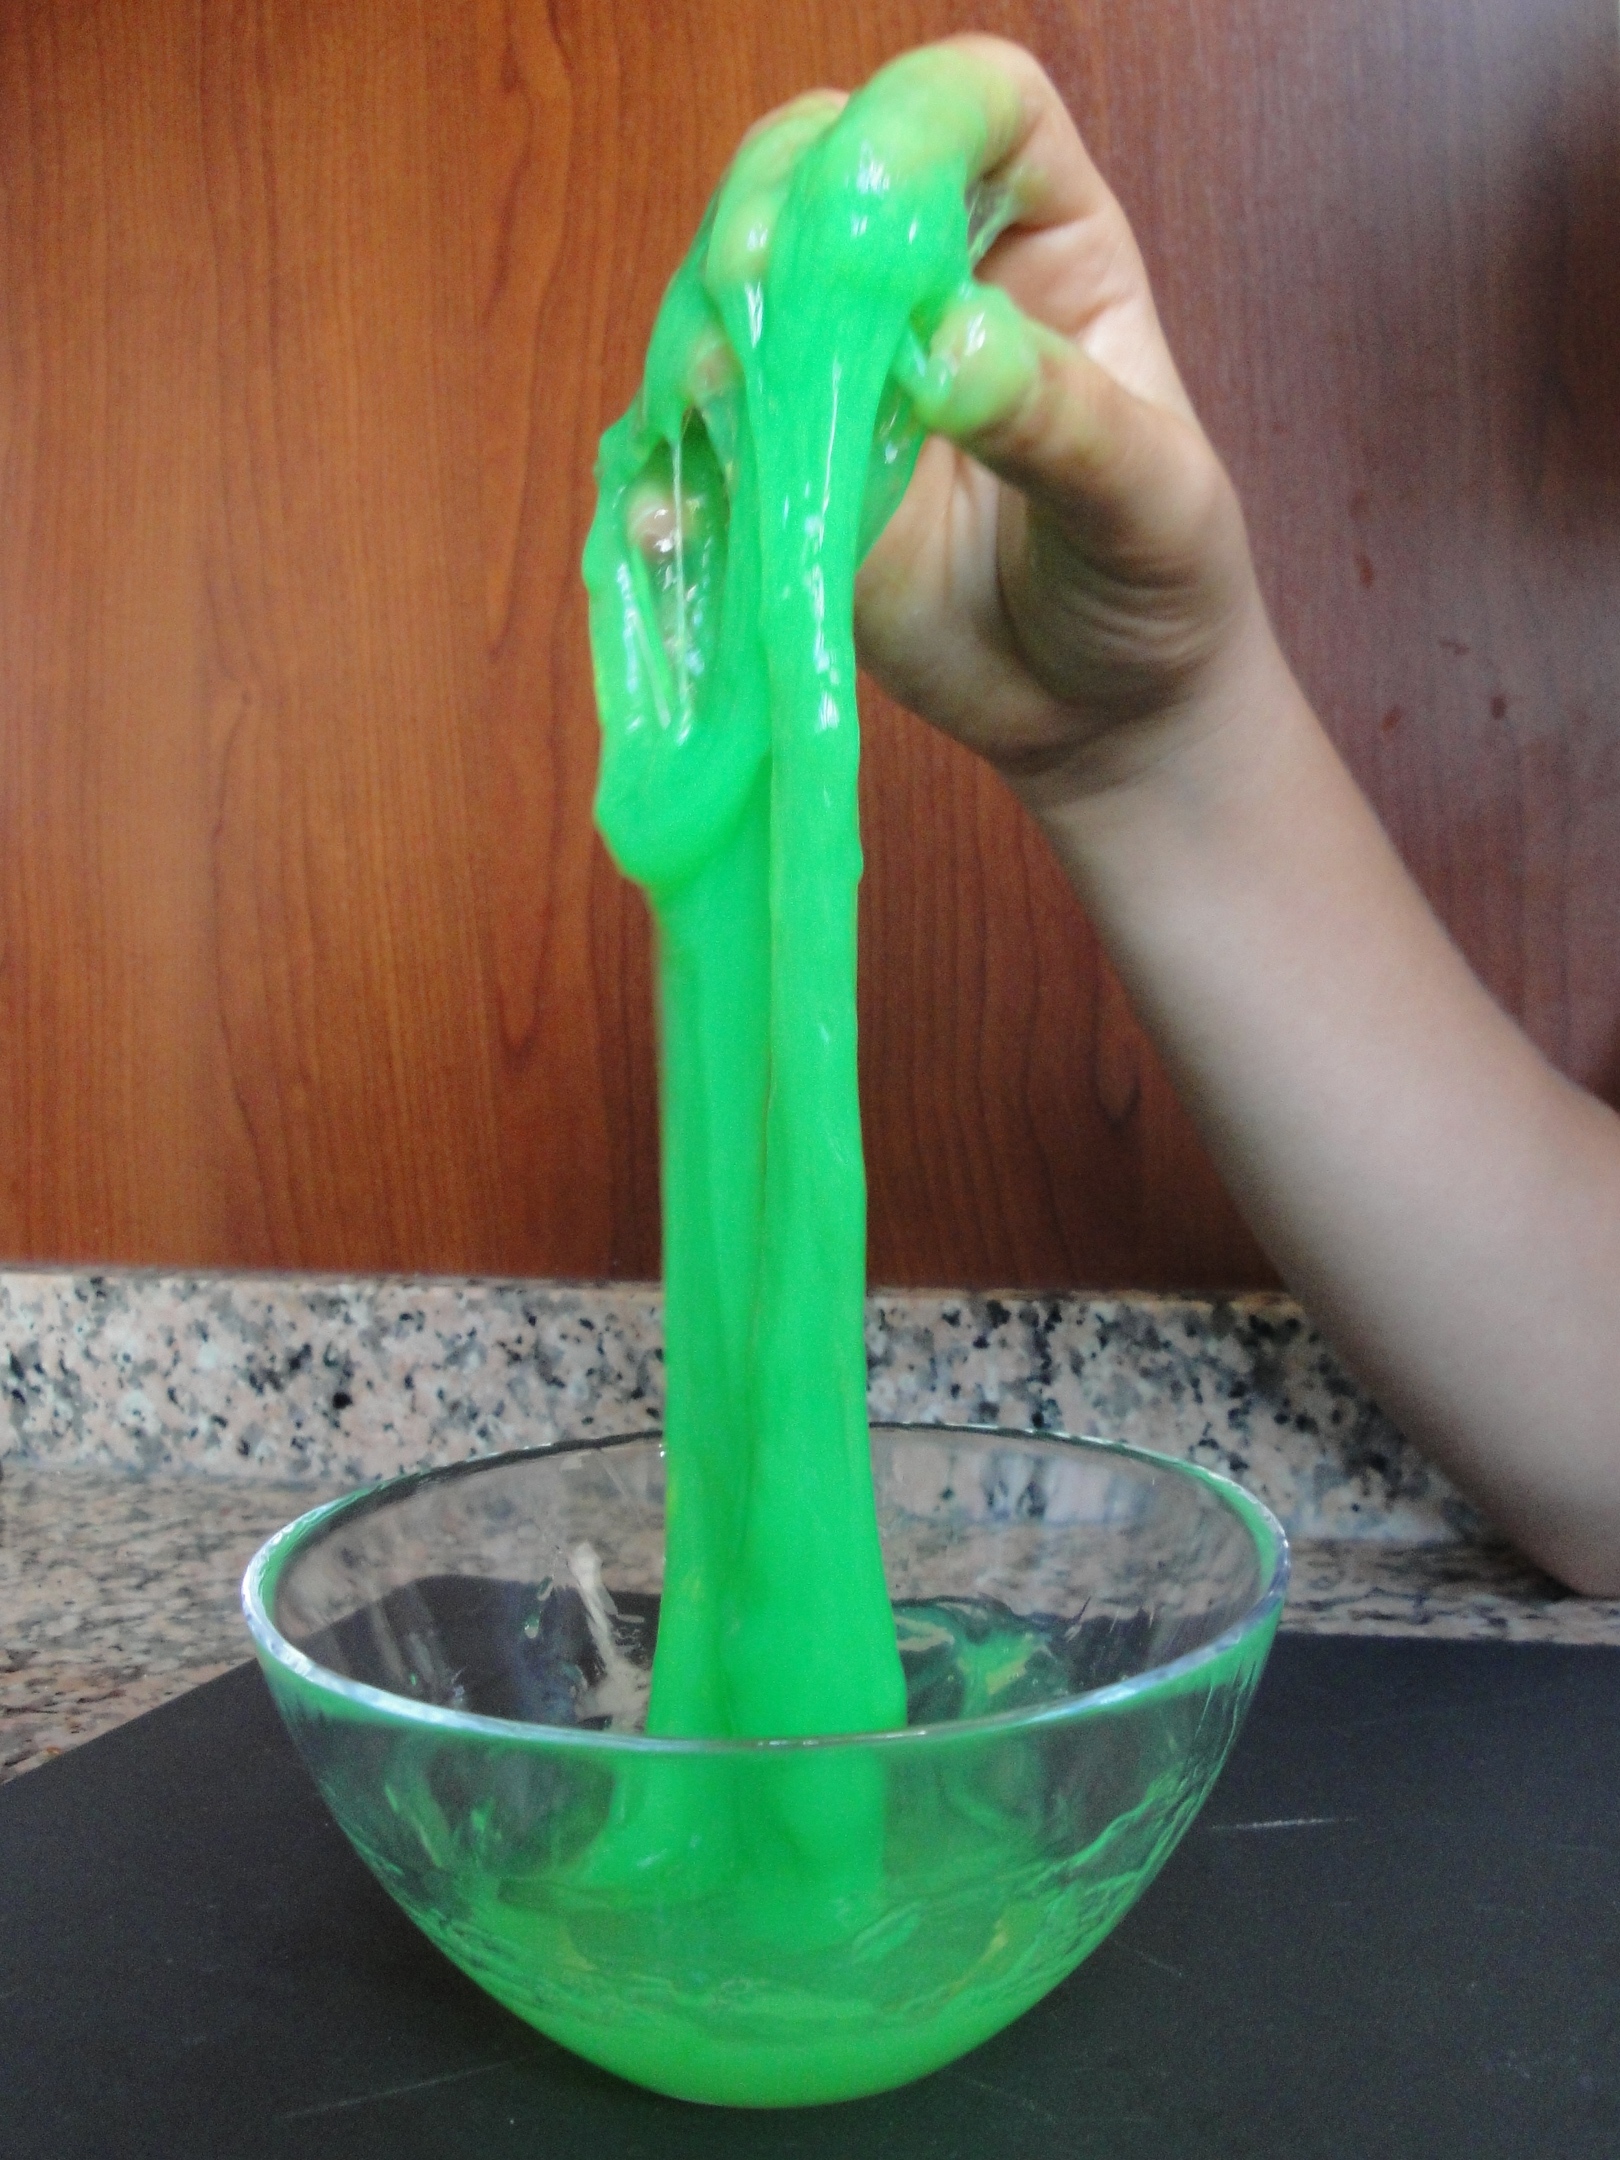 A hand holding green slime coming out of a clear bowl